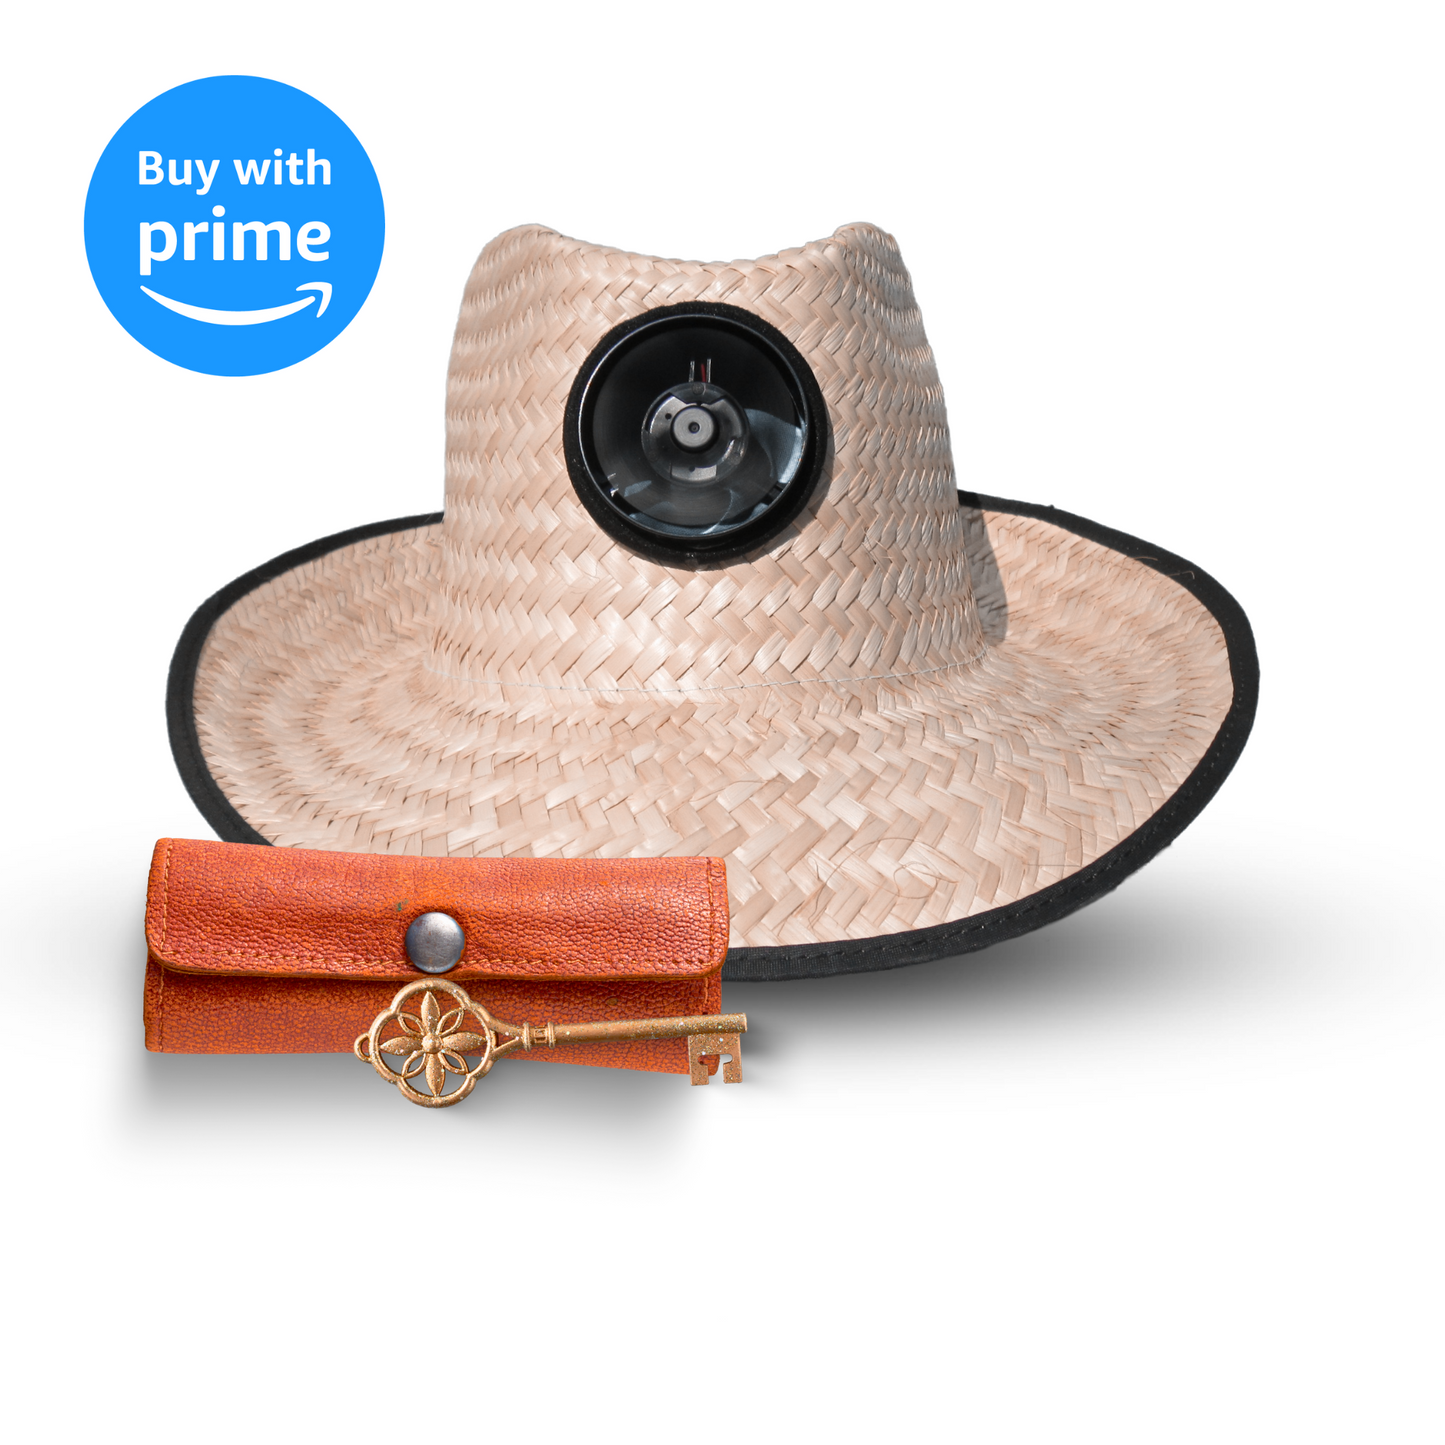 KOOL BREEZE SOLAR HAT for Men- Straw Hat Men's Brown Fedora Brown Under -  Sun Hat with Solar Panel and Built-in Fan, Brown, One Size : :  Clothing, Shoes & Accessories